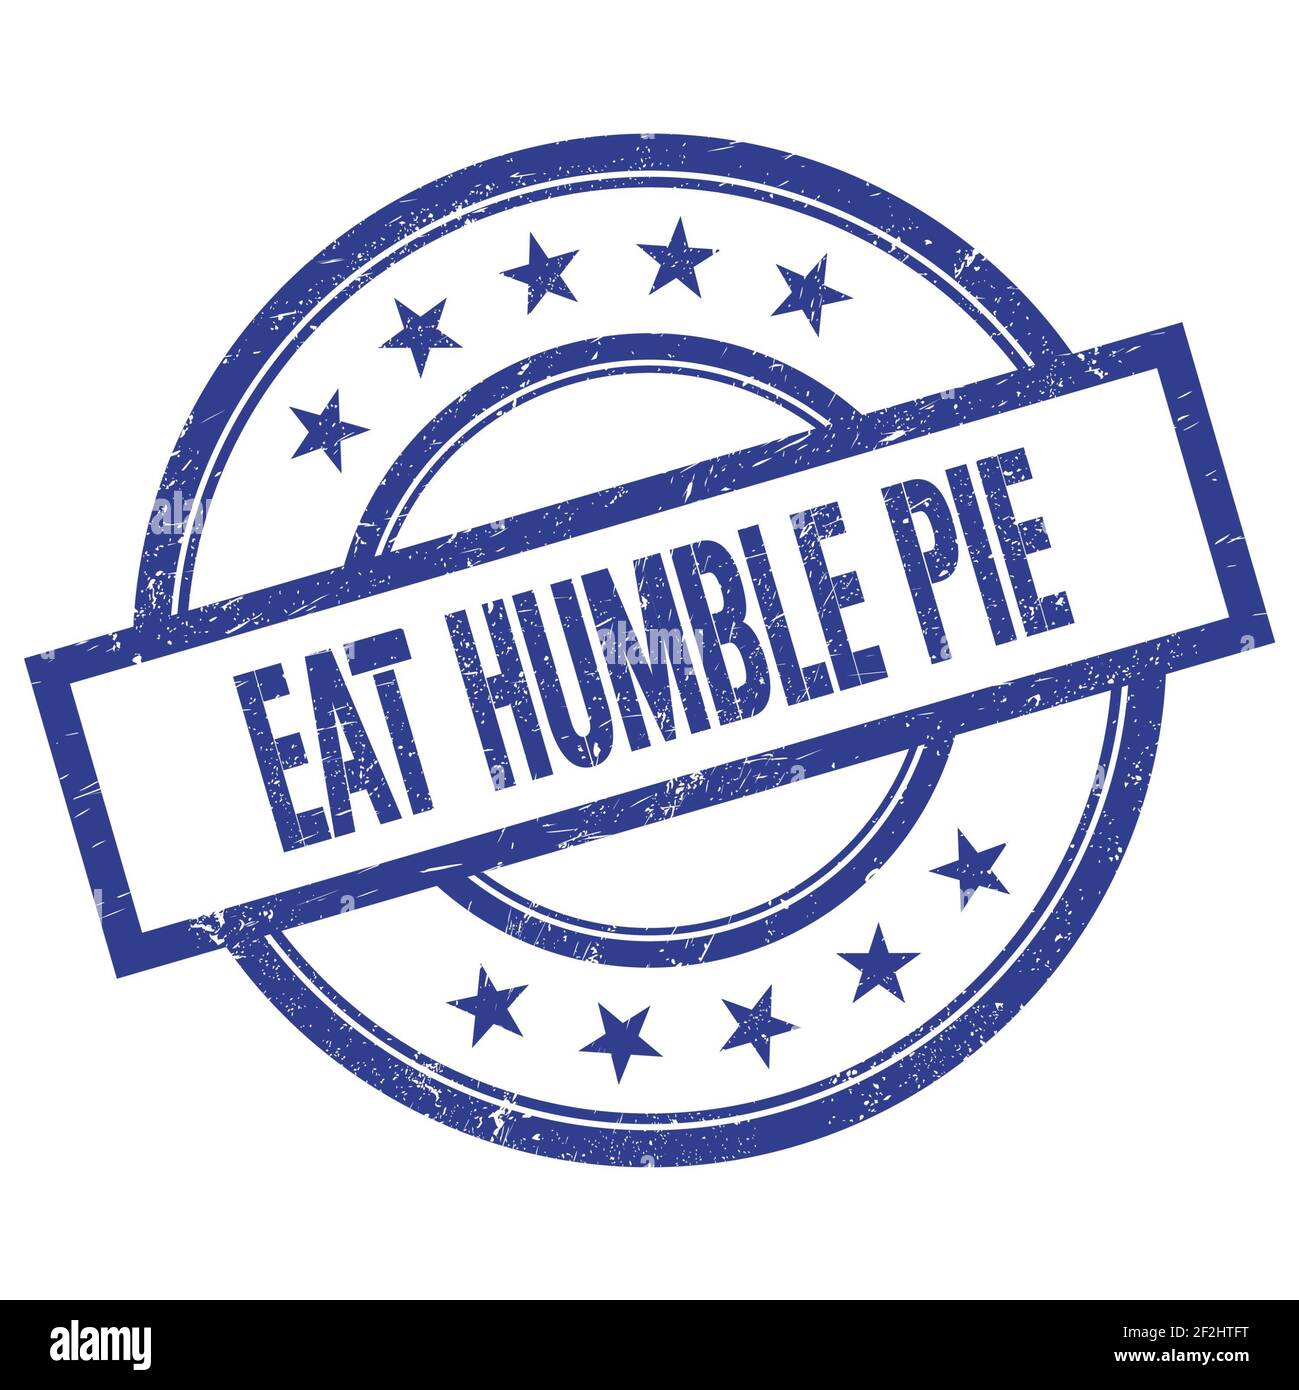 EAT HUMBLE PIE text written on blue round vintage rubber stamp Stock Photo  - Alamy